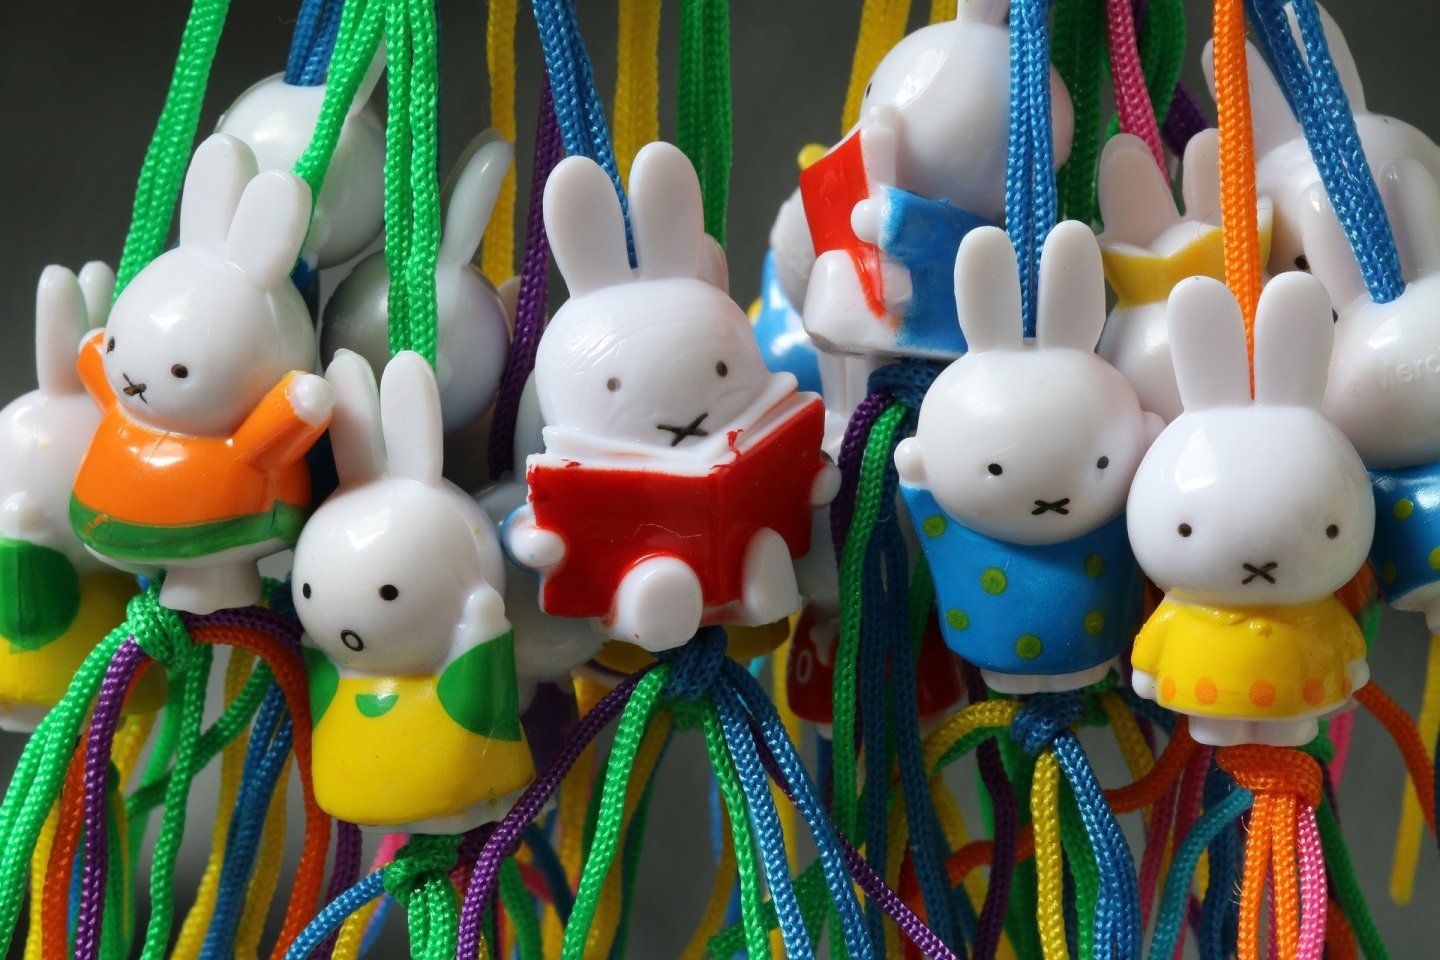 The event will explore works from Dick Bruna with other pieces from the museum\'s collection